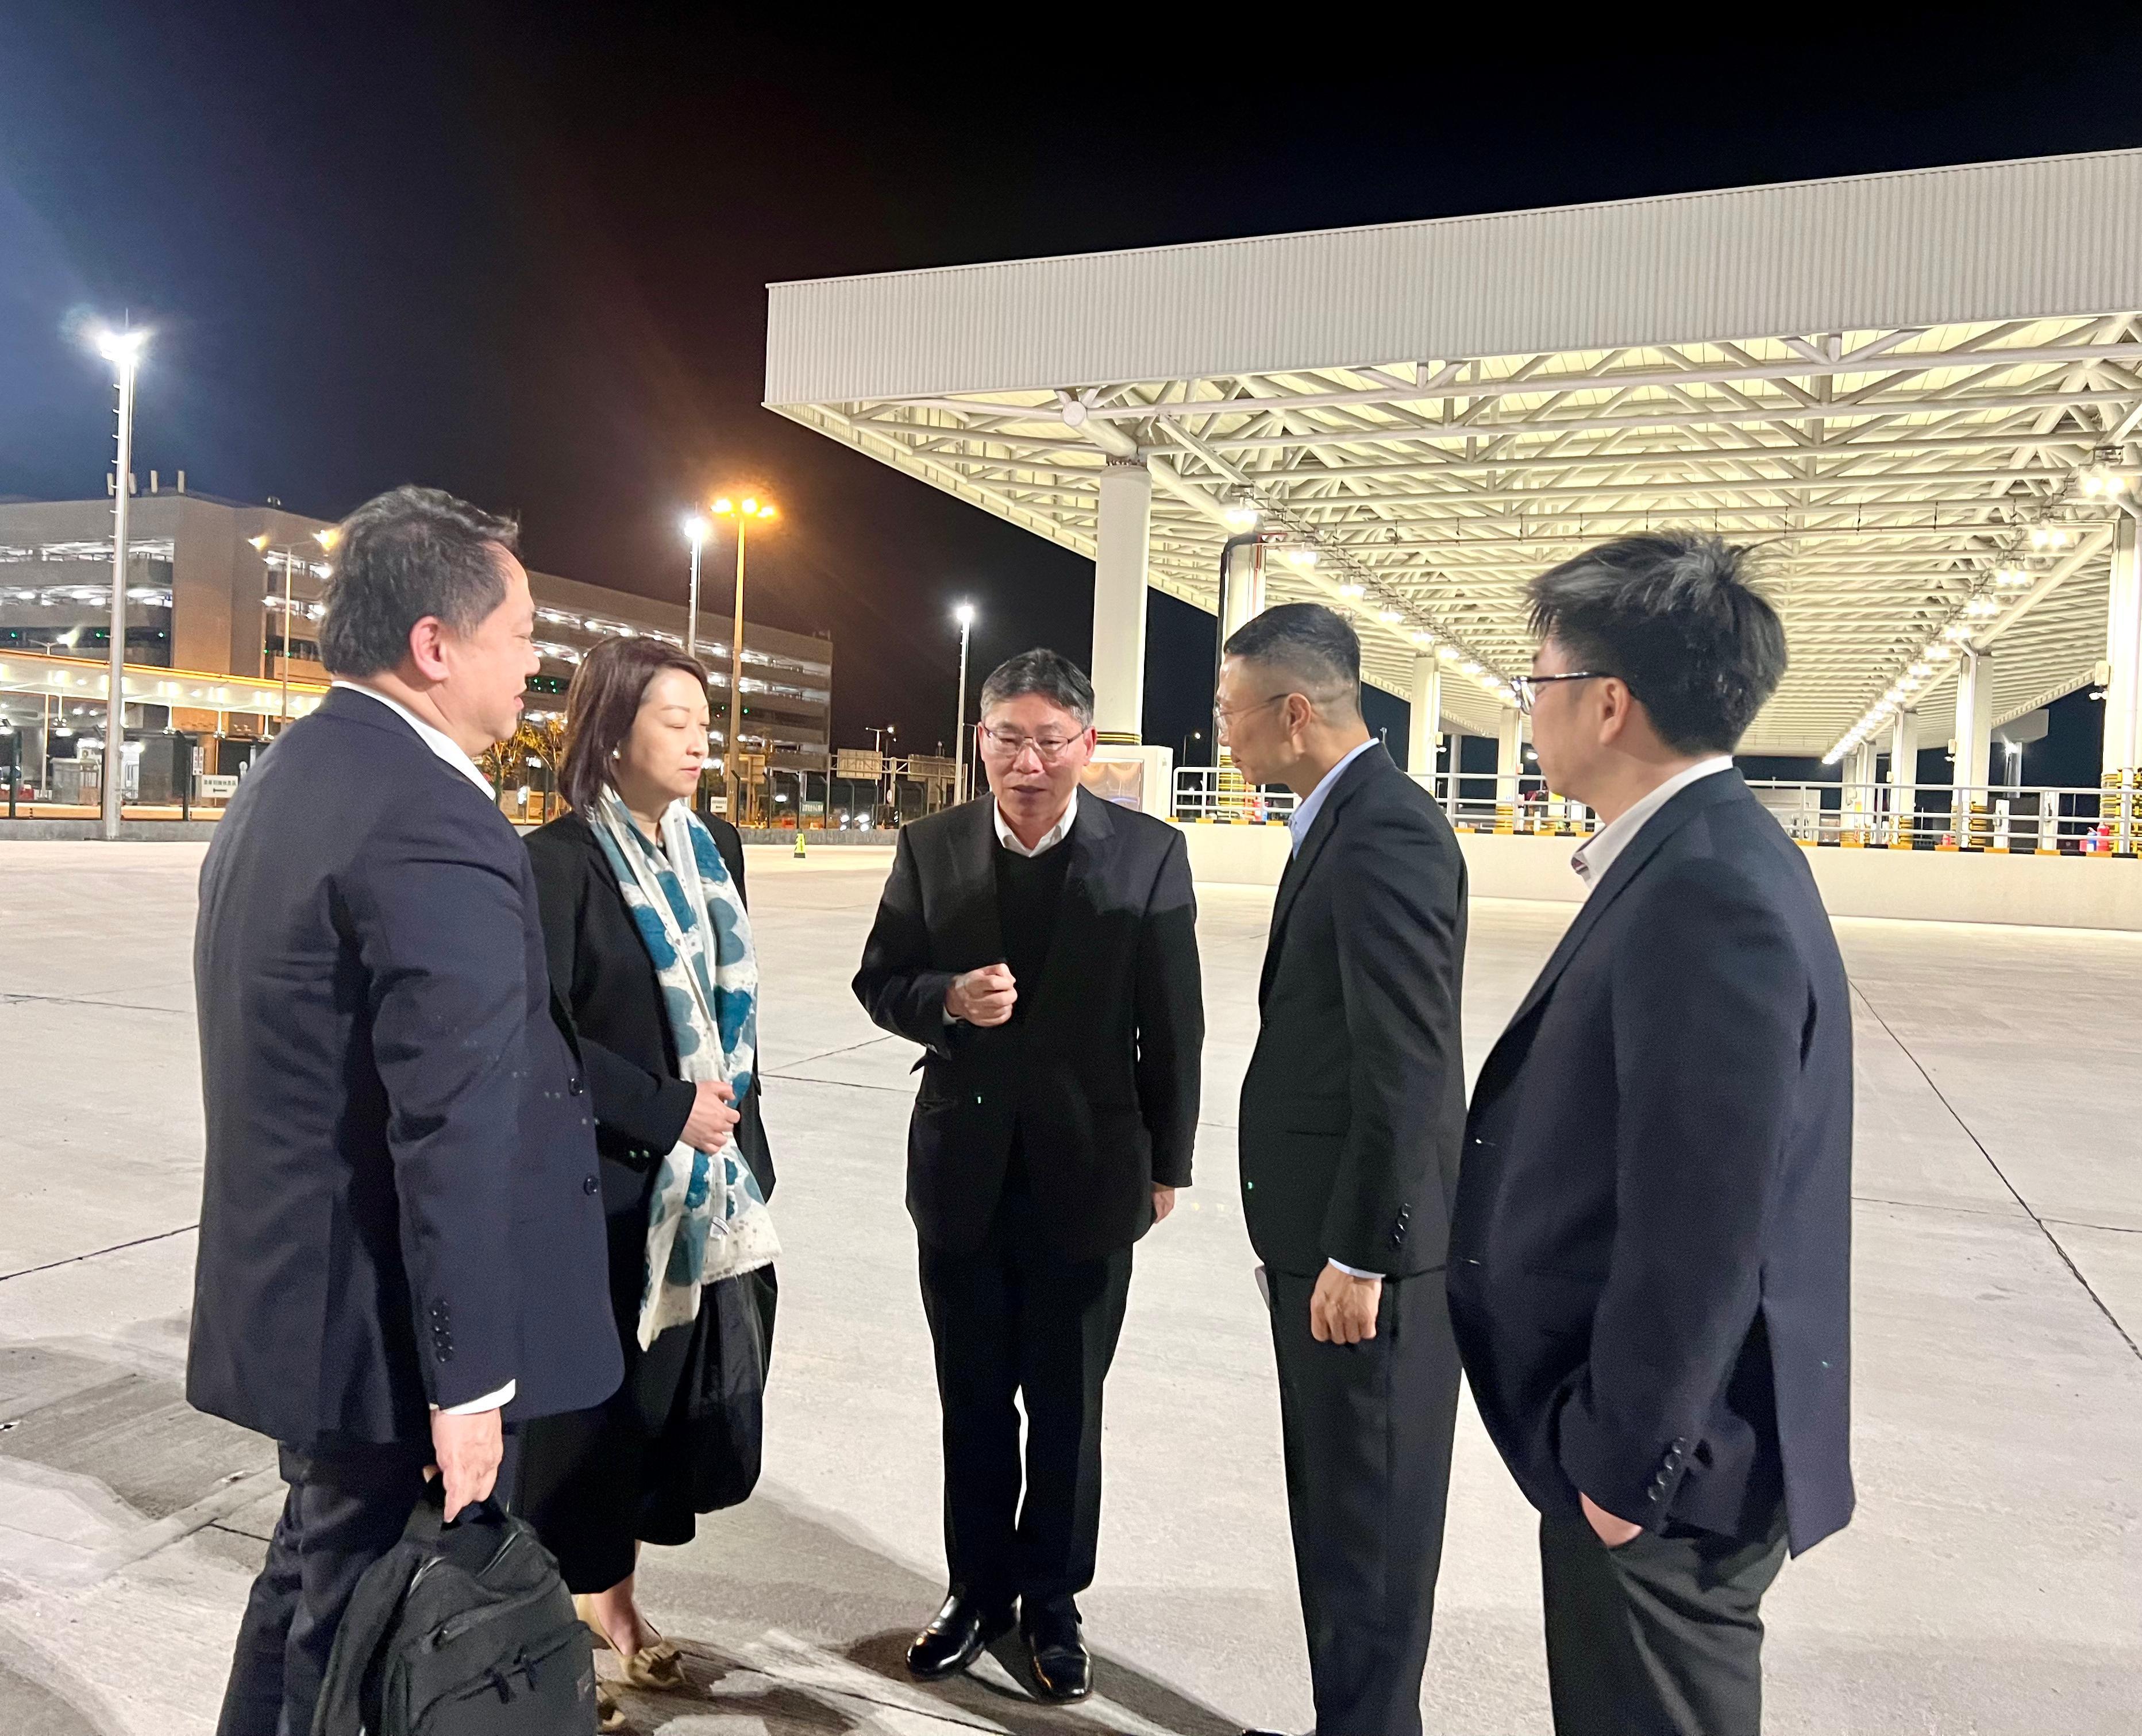 The Secretary for Transport and Logistics, Mr Lam Sai-hung, visited Zhuhai and Macao today (March 12). Photo shows Mr Lam (centre), accompanied by the Director of the Macao Transport Bureau, Mr Lam Hin-san (second right), inspecting the cross-boundary logistics transfer facility at the Hong Kong-Zhuhai-Macao Bridge Macao Port. Also present is the Commissioner for Transport, Ms Angela Lee (second left).